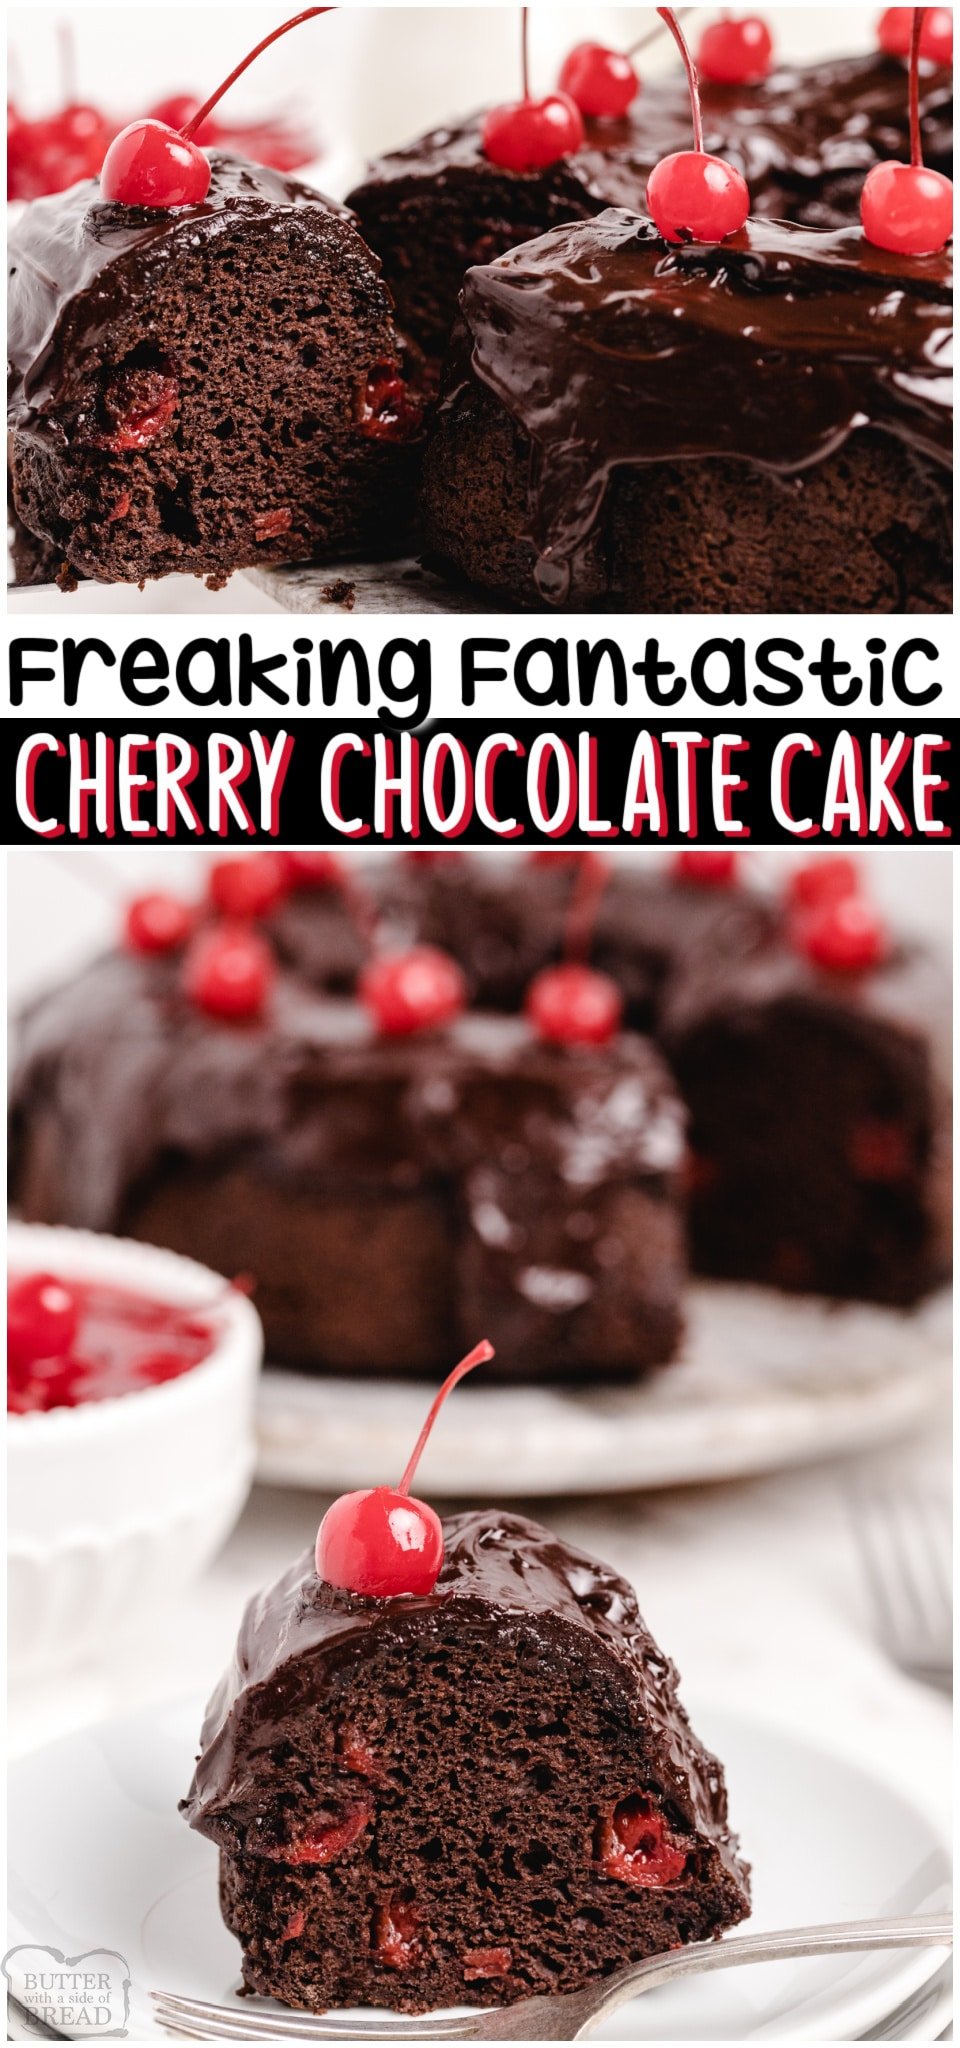 Family Favorite Chocolate Cherry Cake with only 3 ingredients: a cake mix, cherry pie filling & eggs!  You're going to love this moist & delicious chocolate cherry cake recipe! #cake #chocolatecake #cherrycake #cherry #baking #dessert #easyrecipe from BUTTER WITH A SIDE OF BREAD